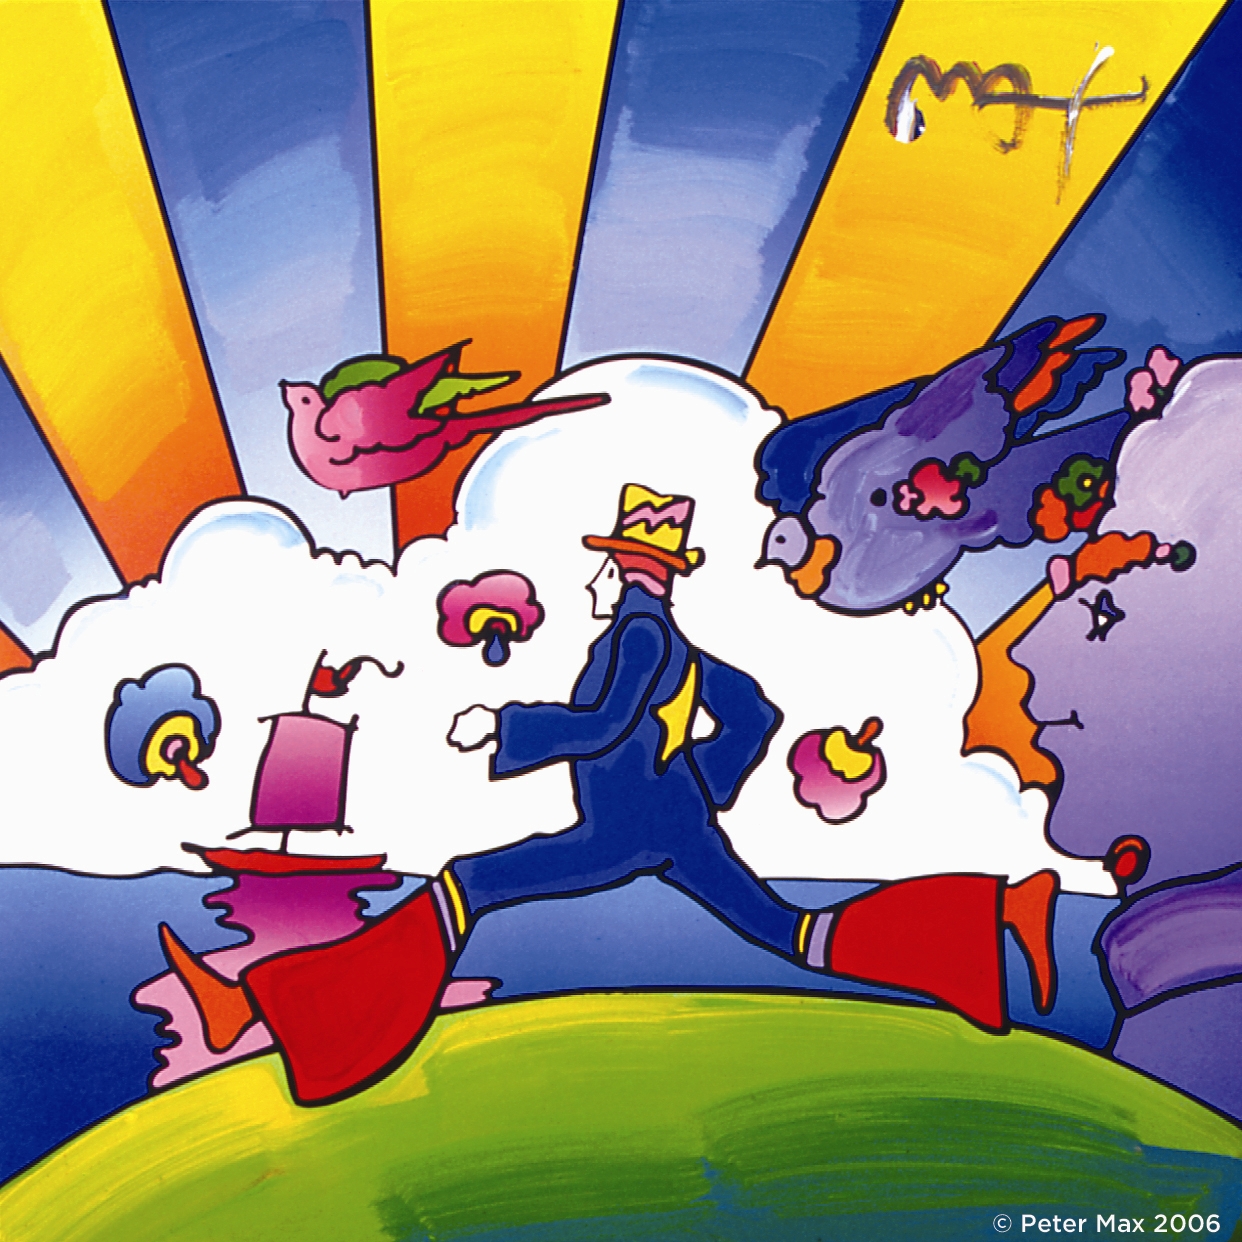 Free download Artist Peter Max appears at Wentworth Galleries on